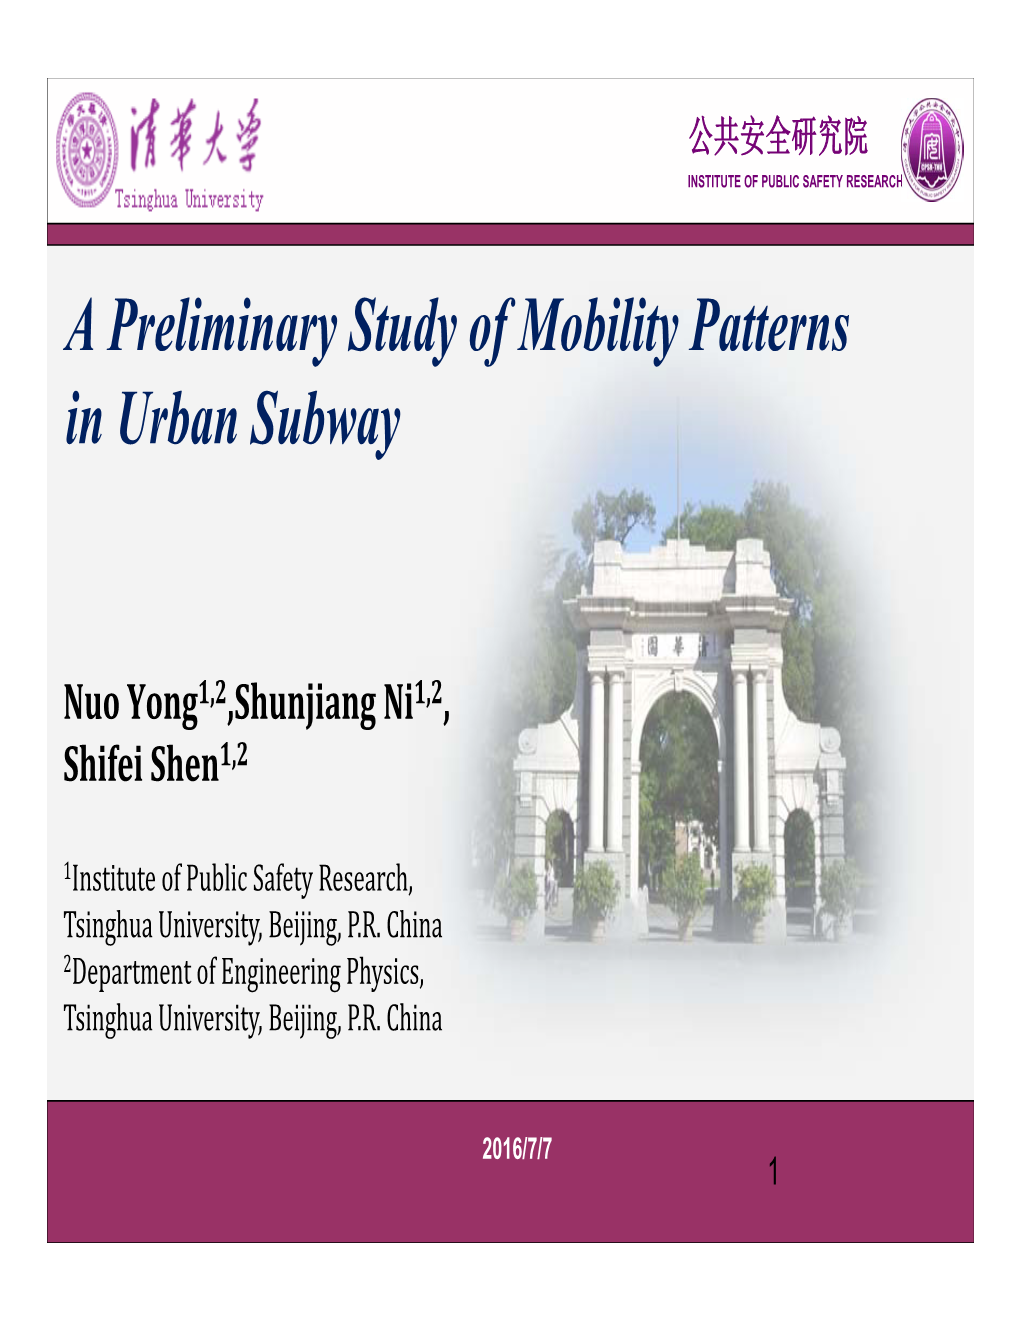 A Preliminary Study of Mobility Patterns in Urban Subway